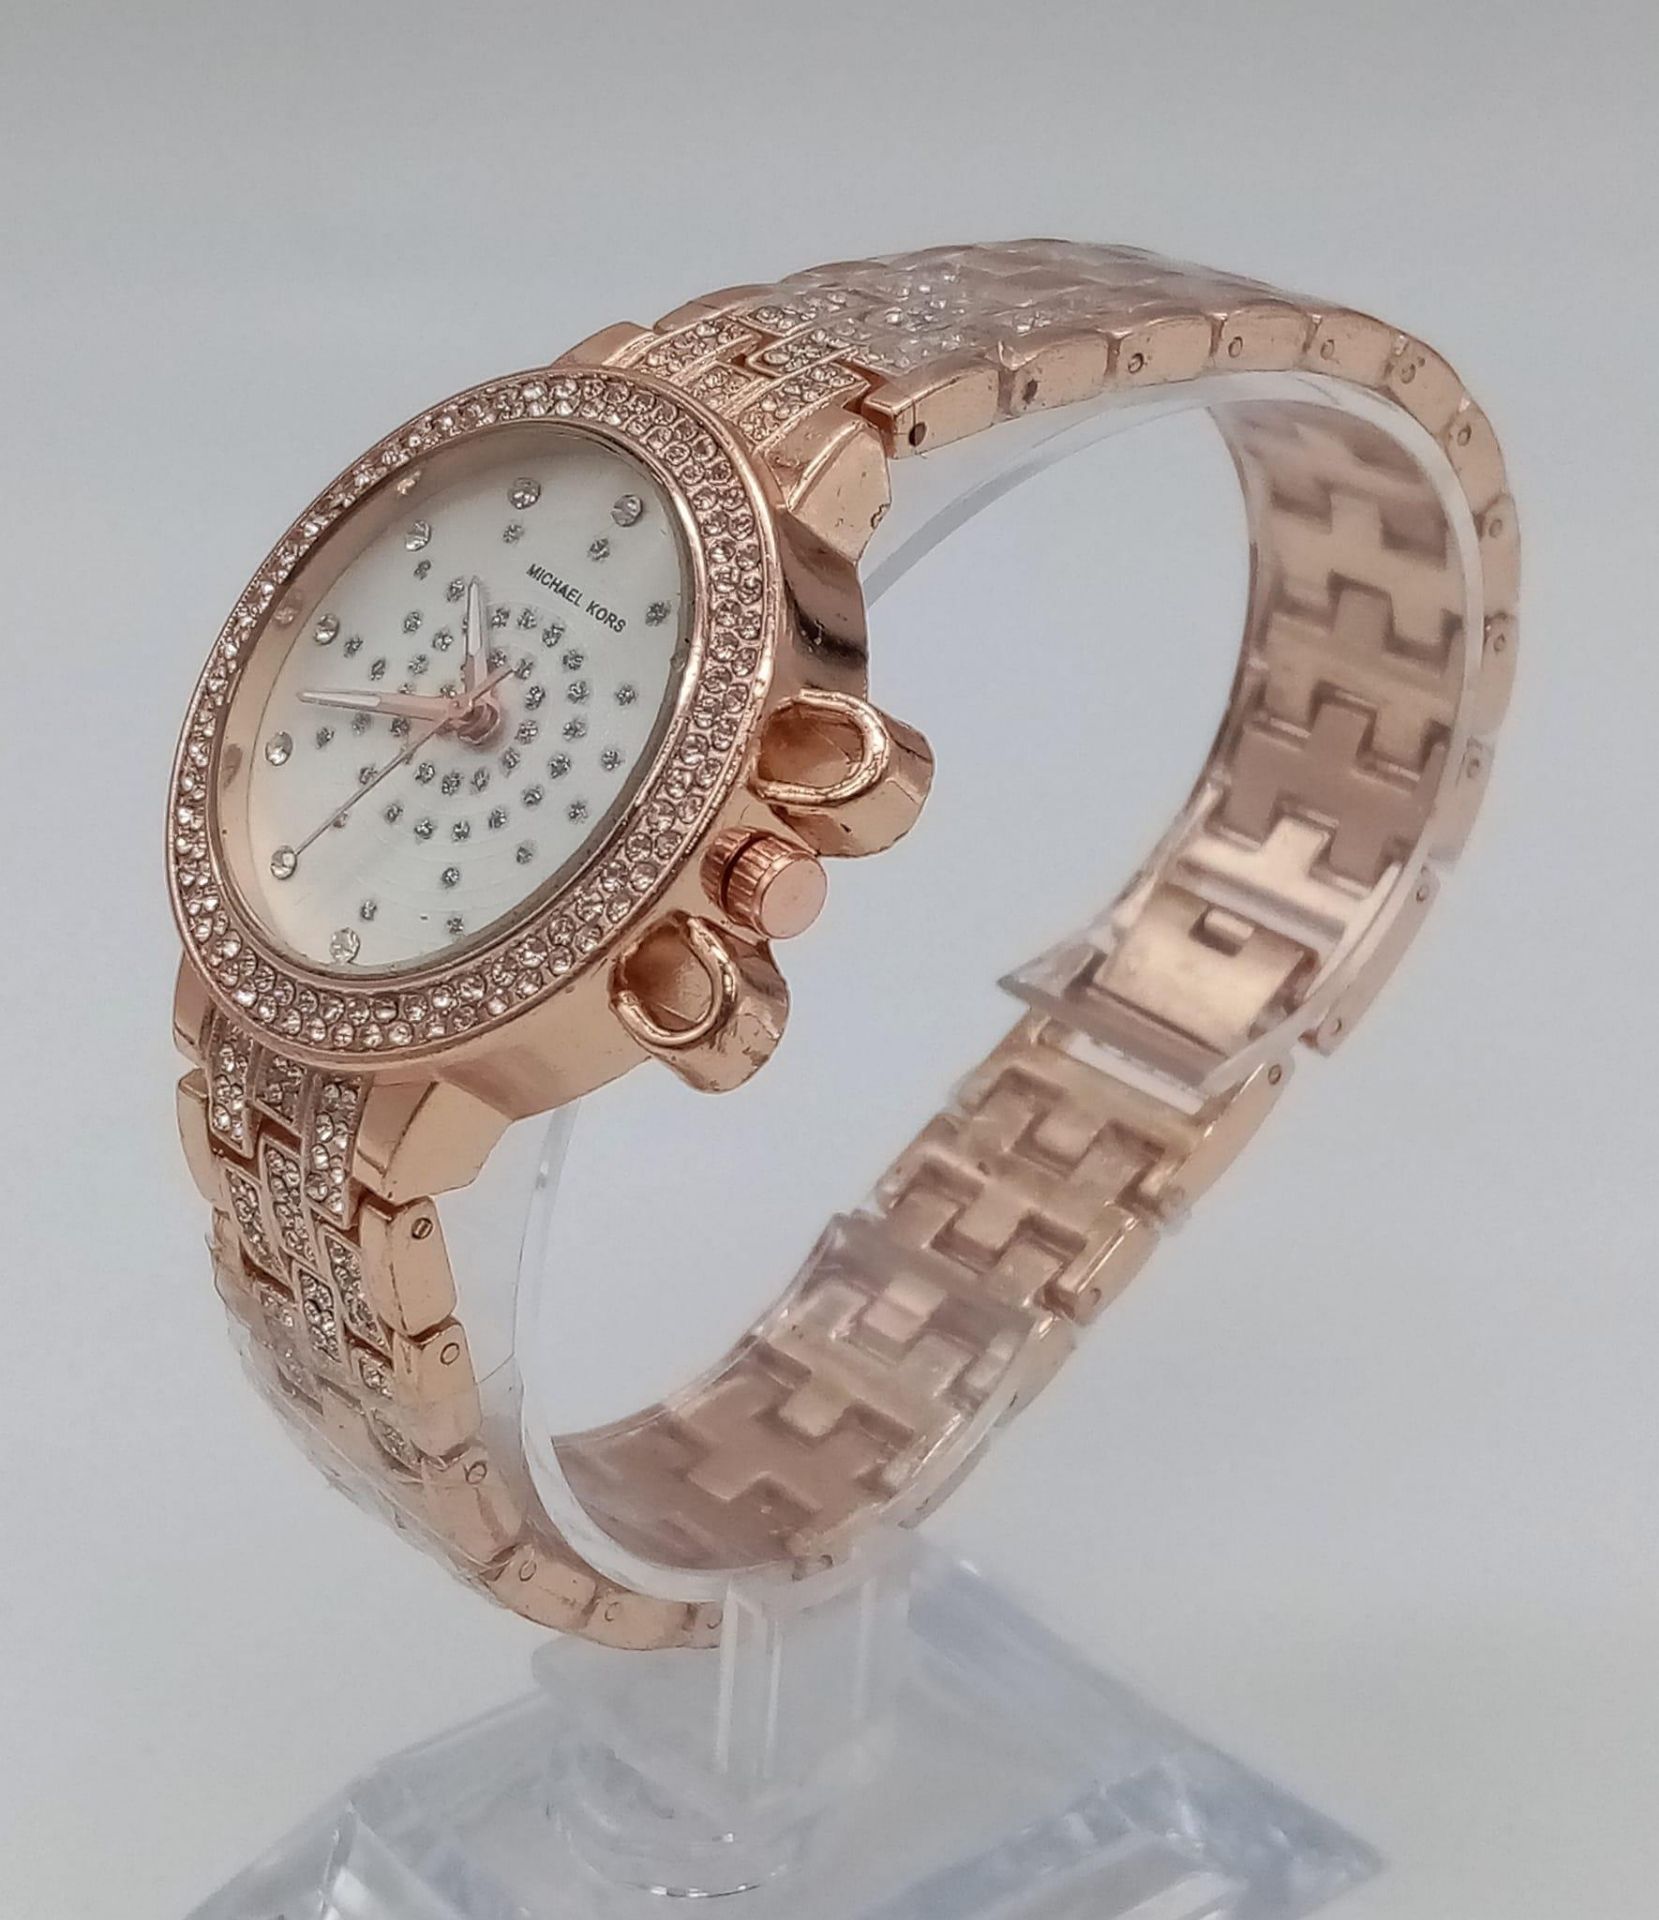 A LADIES MICHAEL KORS FACSIMILE WATCH IN ROSE GOLD TONE STONE SET BEZEL AND STRAP, FULL WORKING - Image 2 of 4